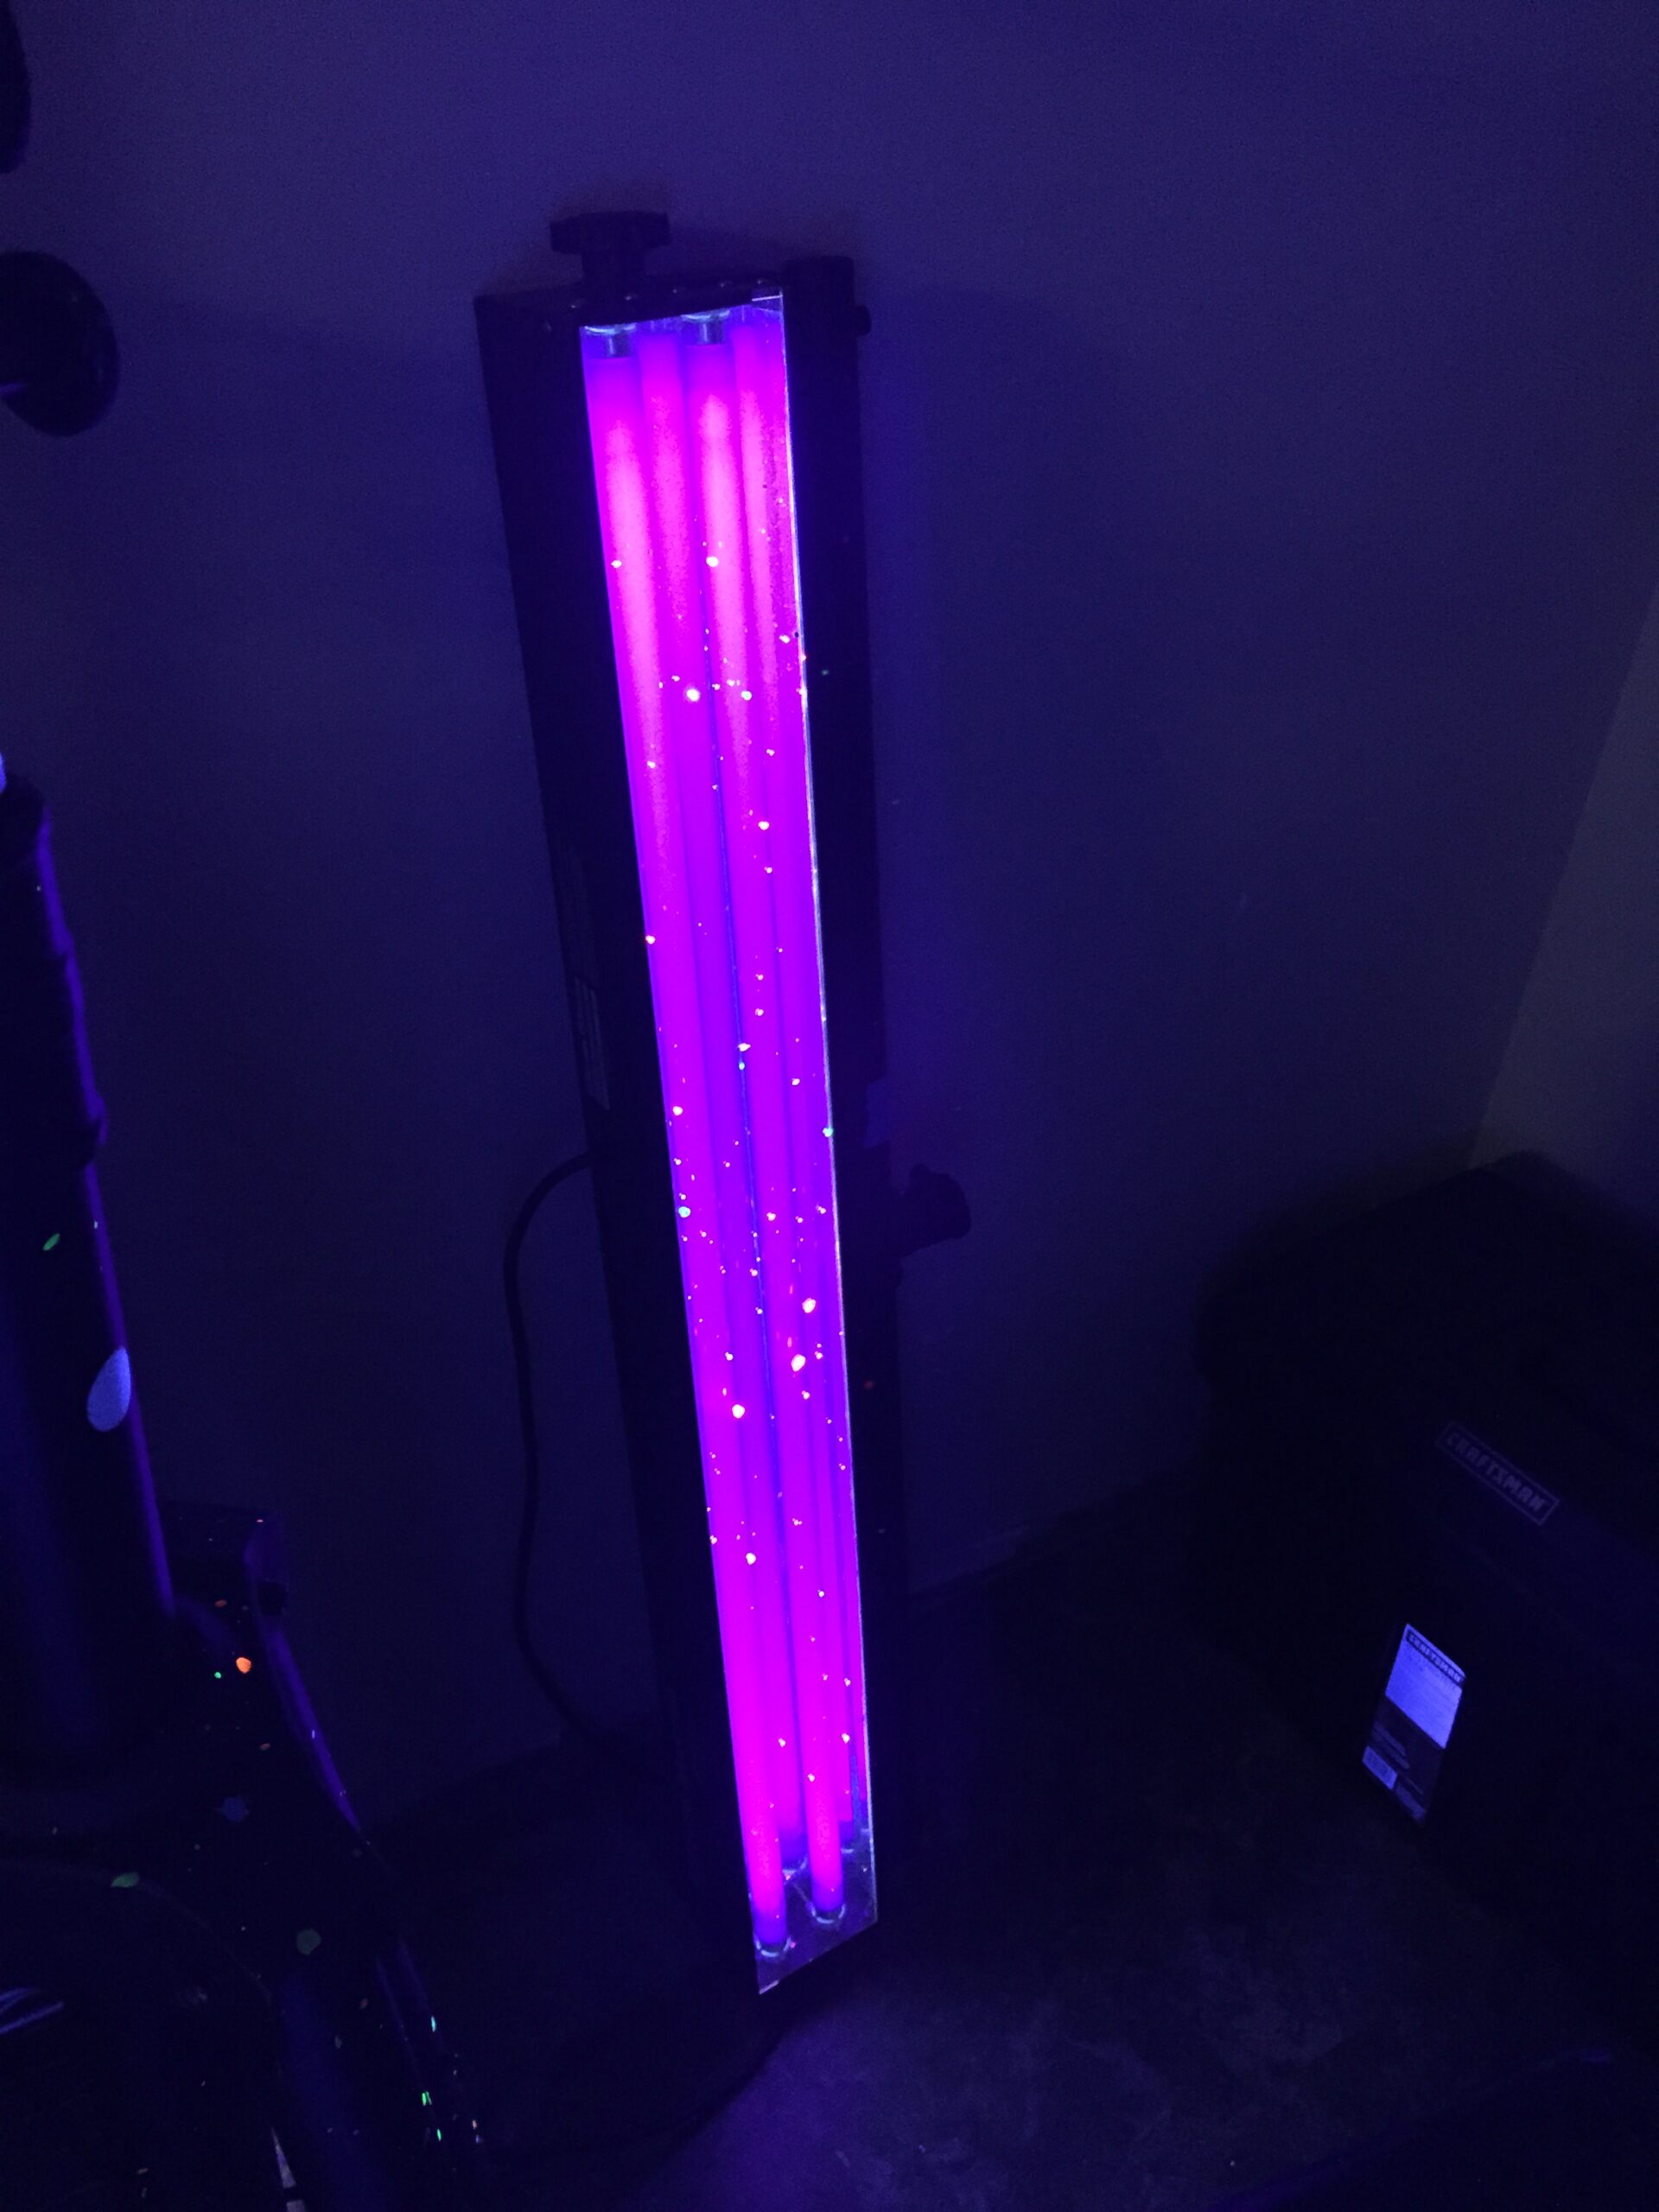 Rent Black Lights! #1 Rated + Free Shipping